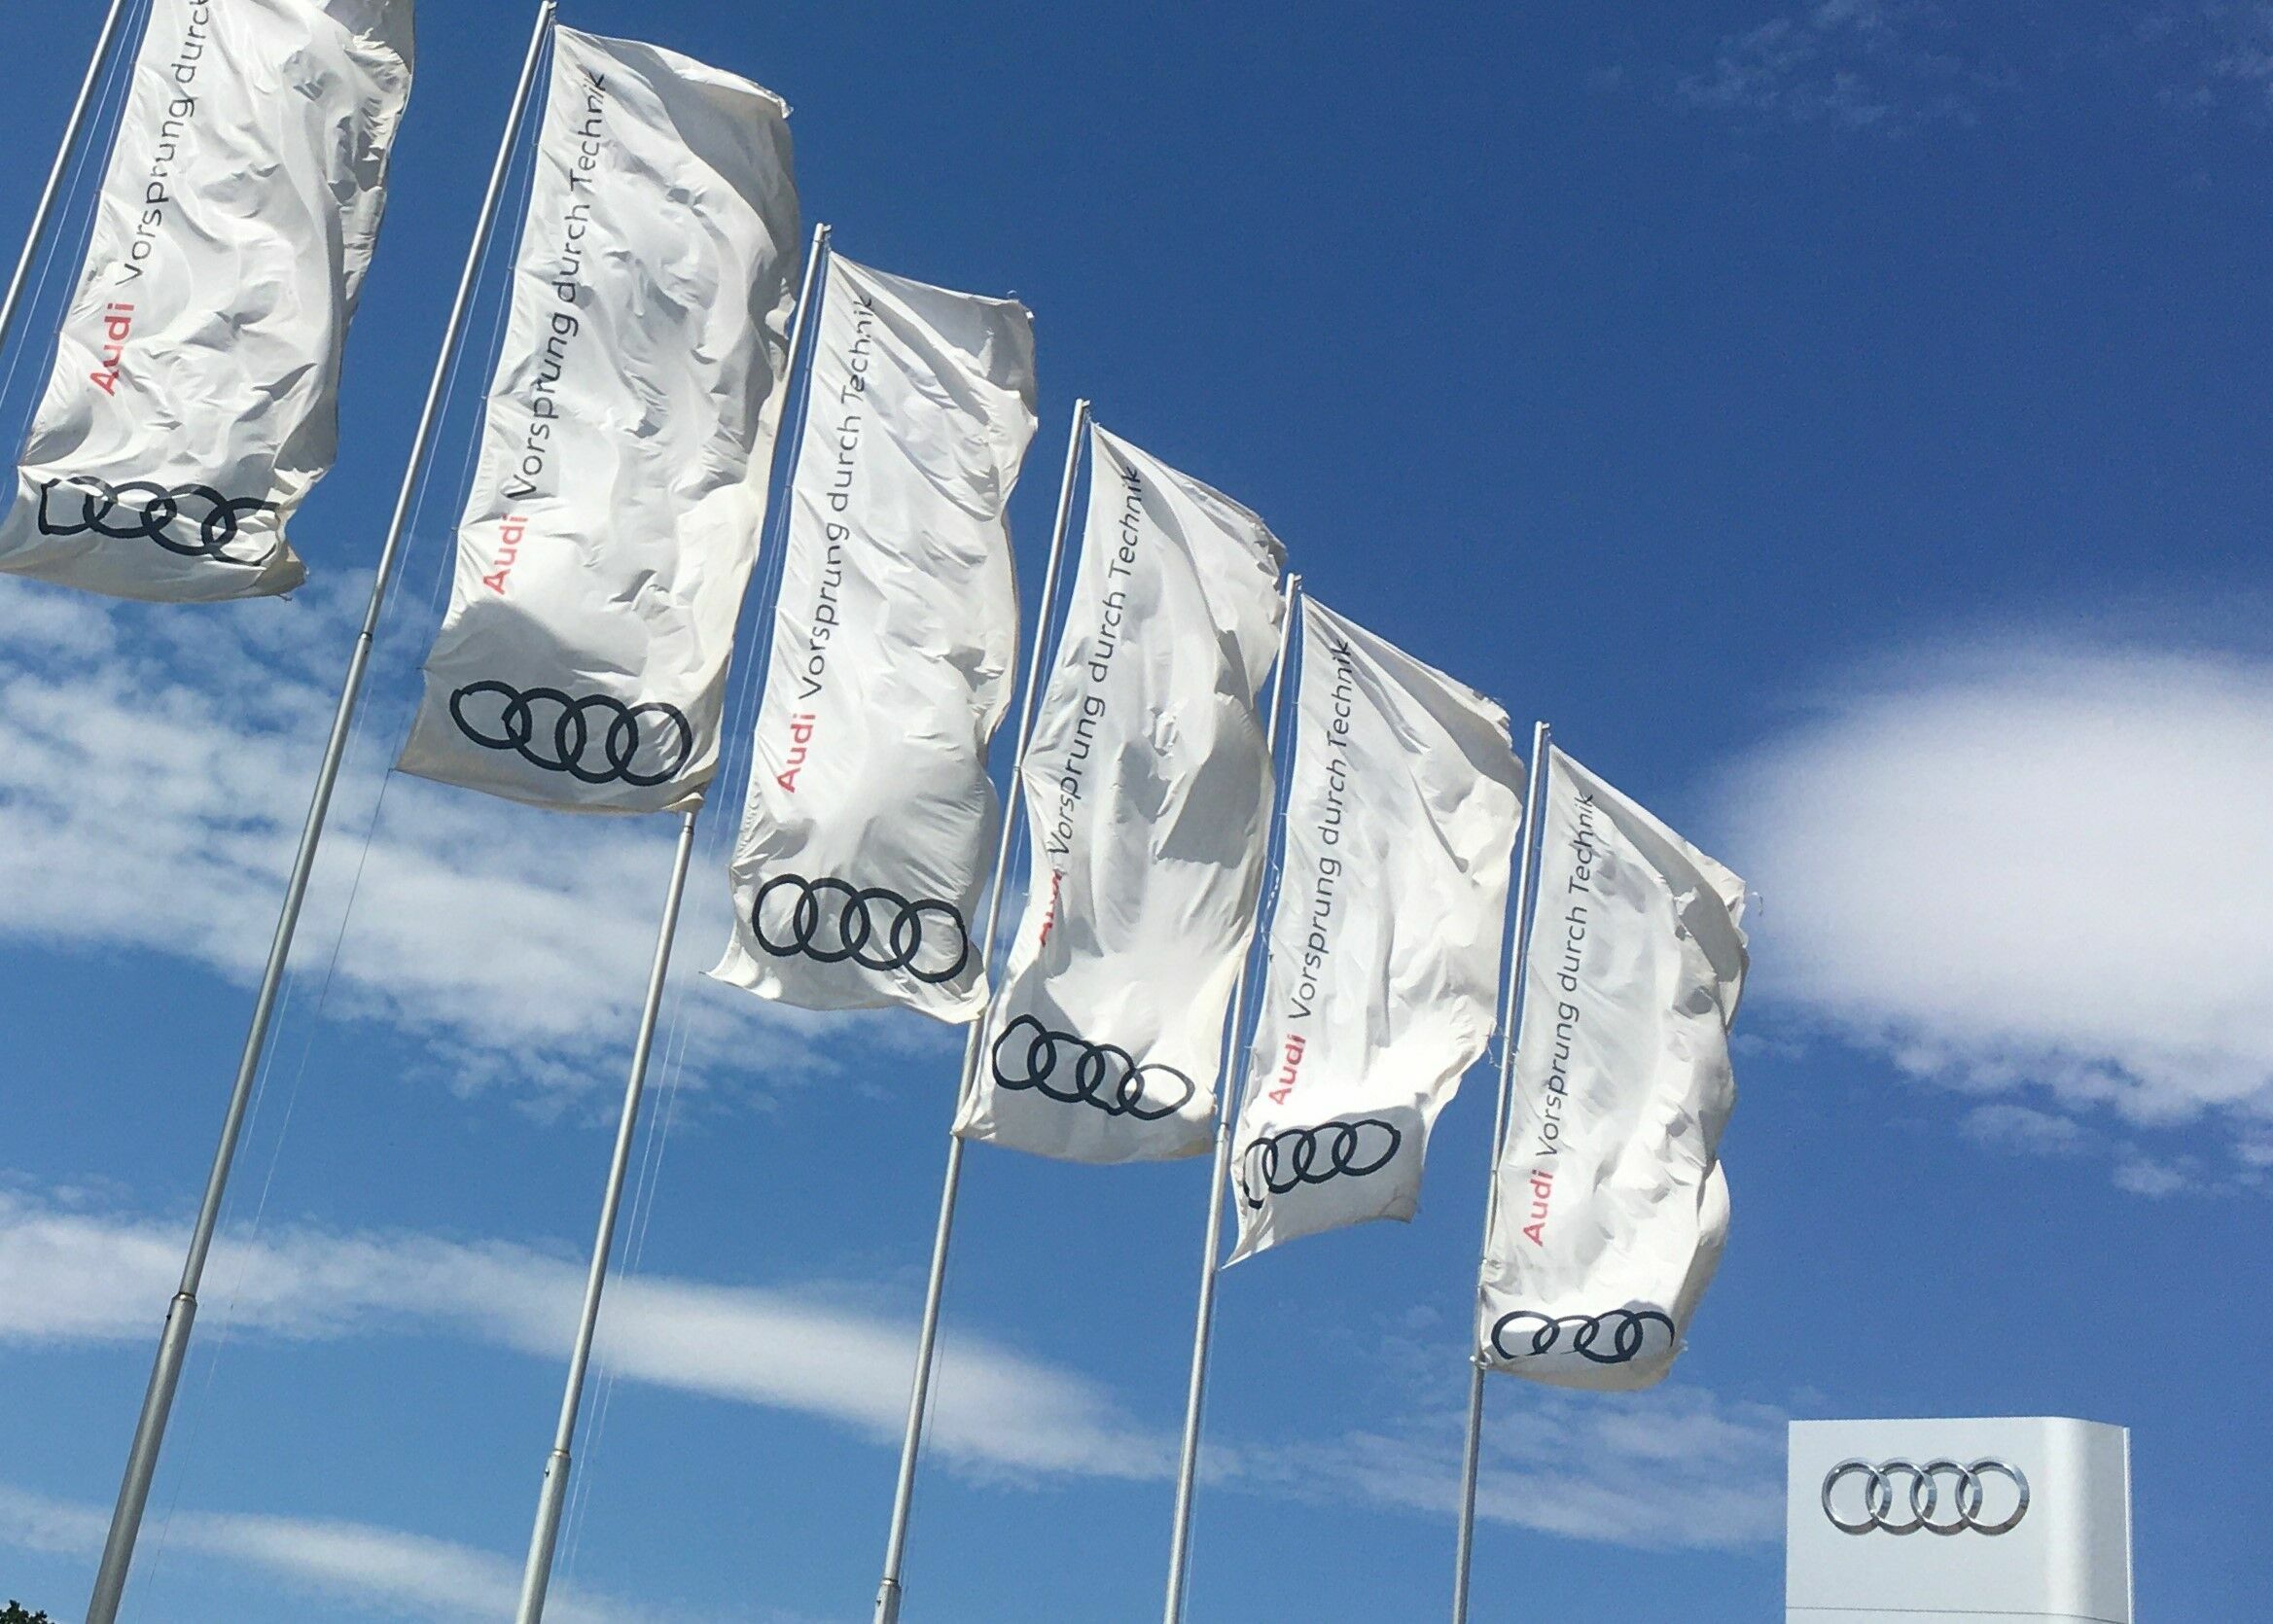 131st Annual General Meeting of AUDI AG